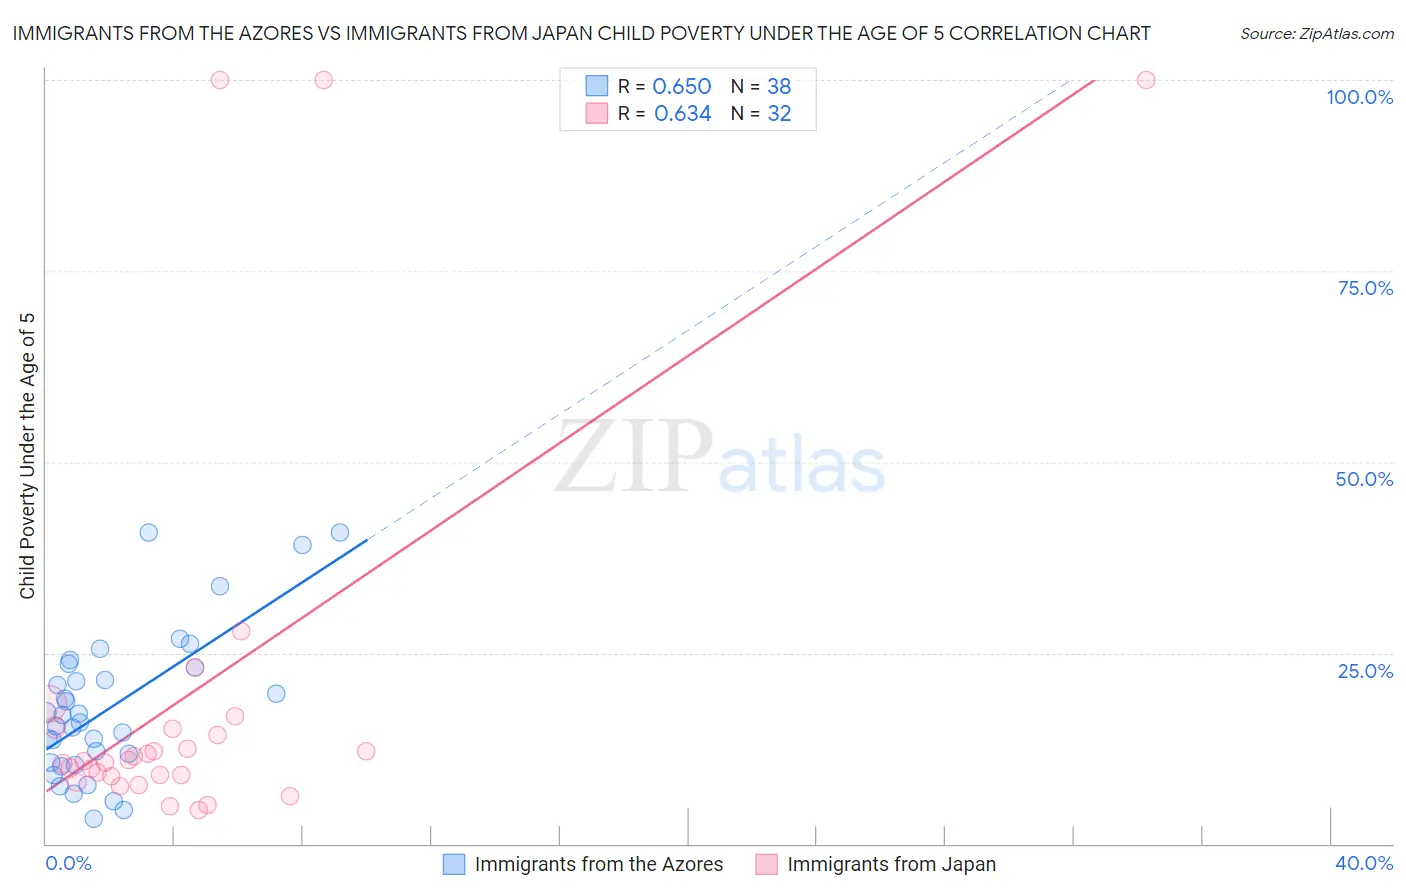 Immigrants from the Azores vs Immigrants from Japan Child Poverty Under the Age of 5